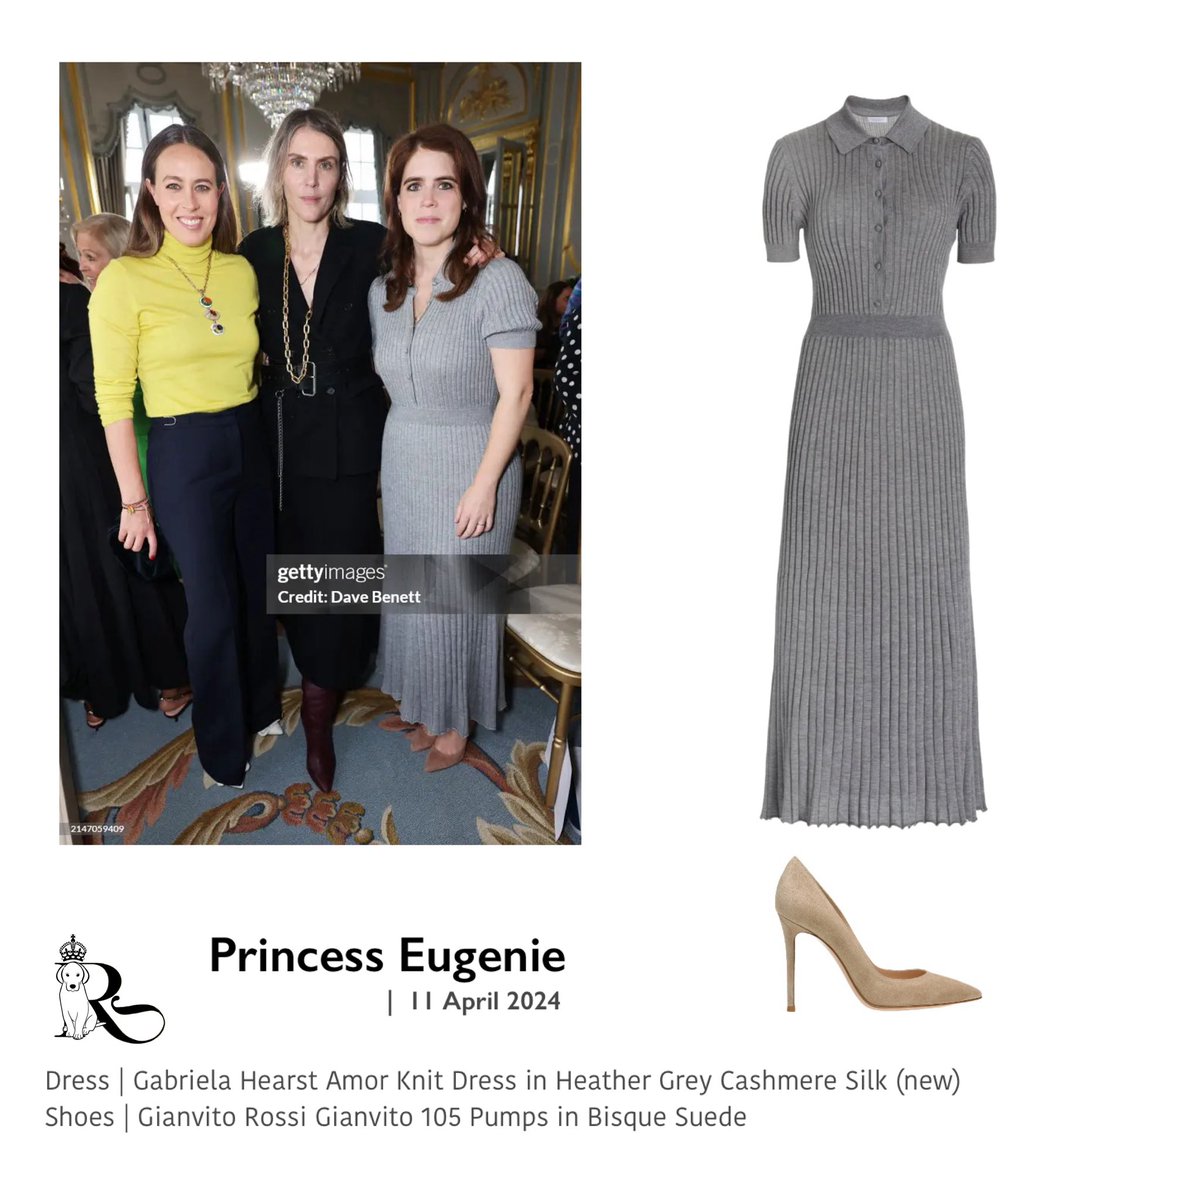 Princess Eugenie has been busy today! Here she is pictured with Princess Nina of Greece and Denmark and Gabriela Hearst, as she attended a reception and panel discussion on the fashion industry's commitment to sustainability. The event was co-hosted by the United States'…